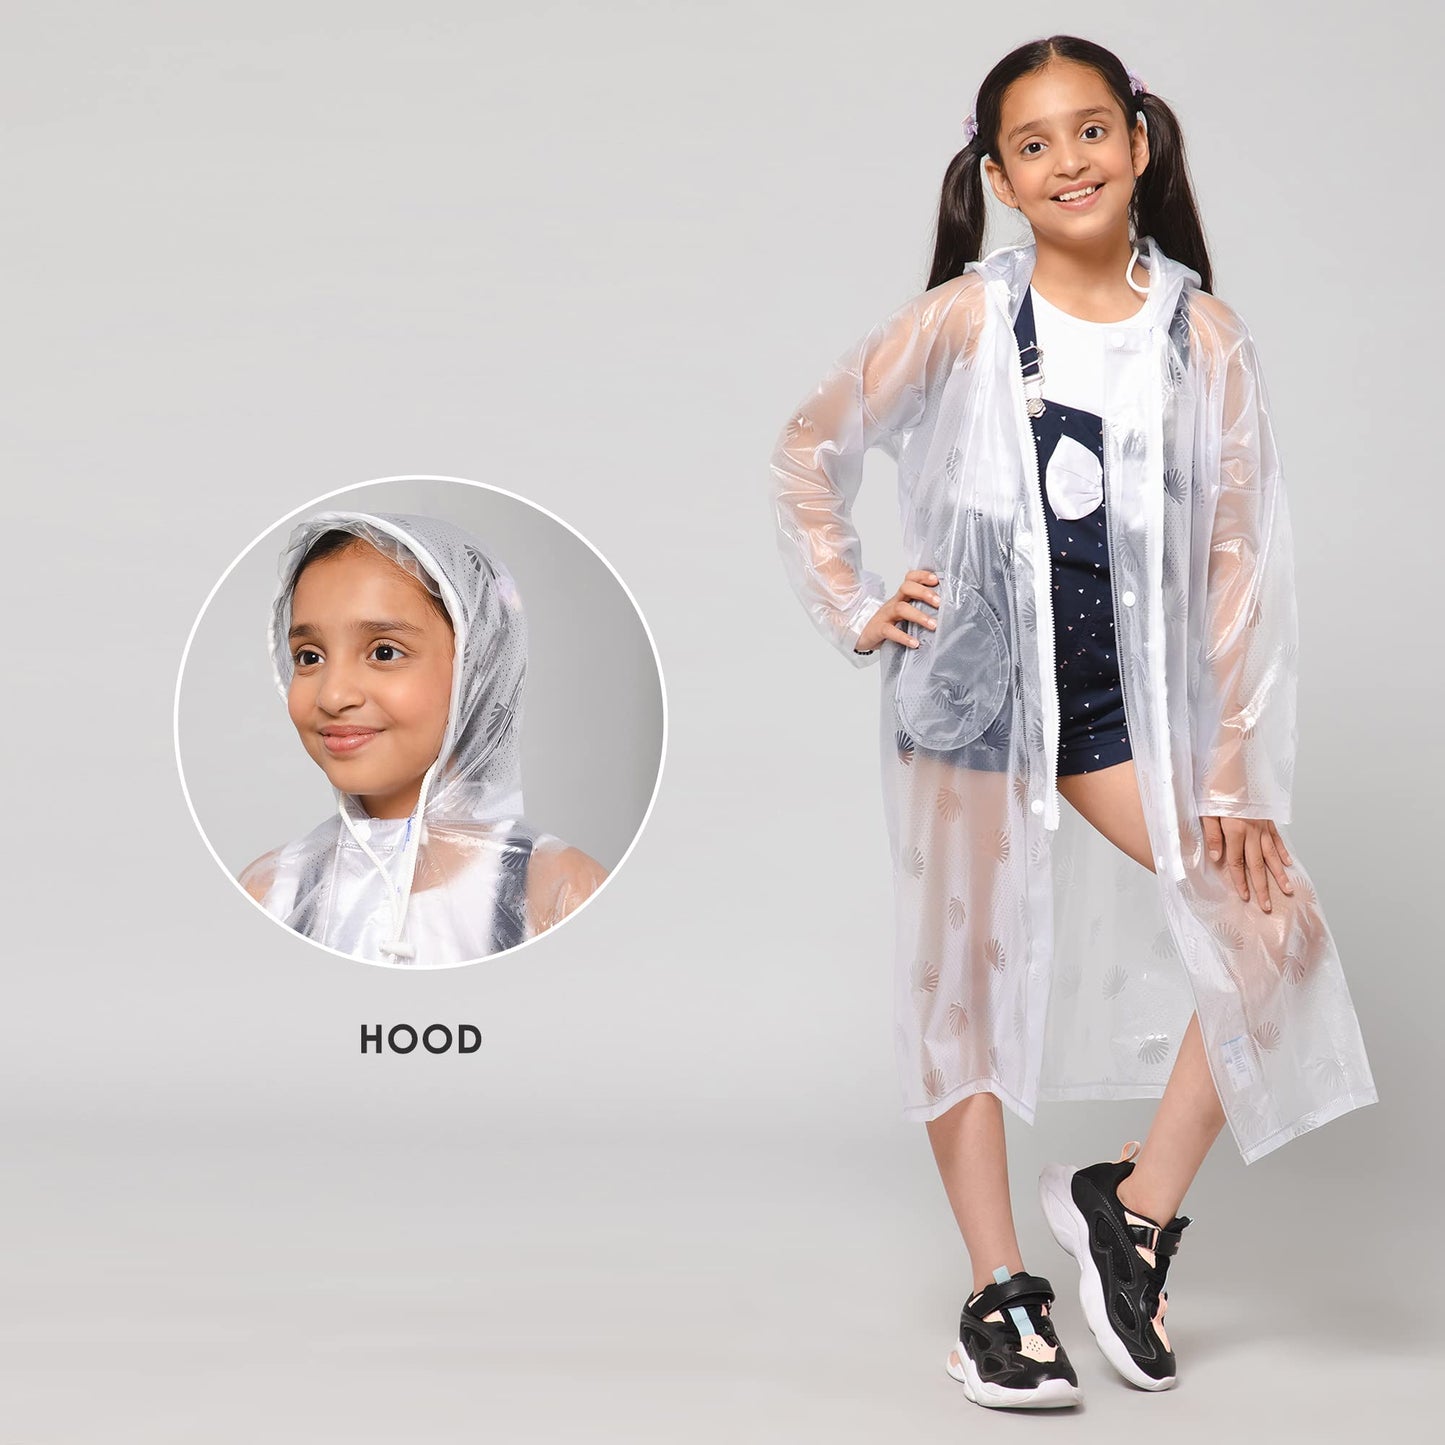 THE CLOWNFISH Storm Shield Series Unisex Kids Waterproof Single Layer PVC Longcoat/Raincoat with Adjustable Hood. Age-11-12 Years (Transparent White)